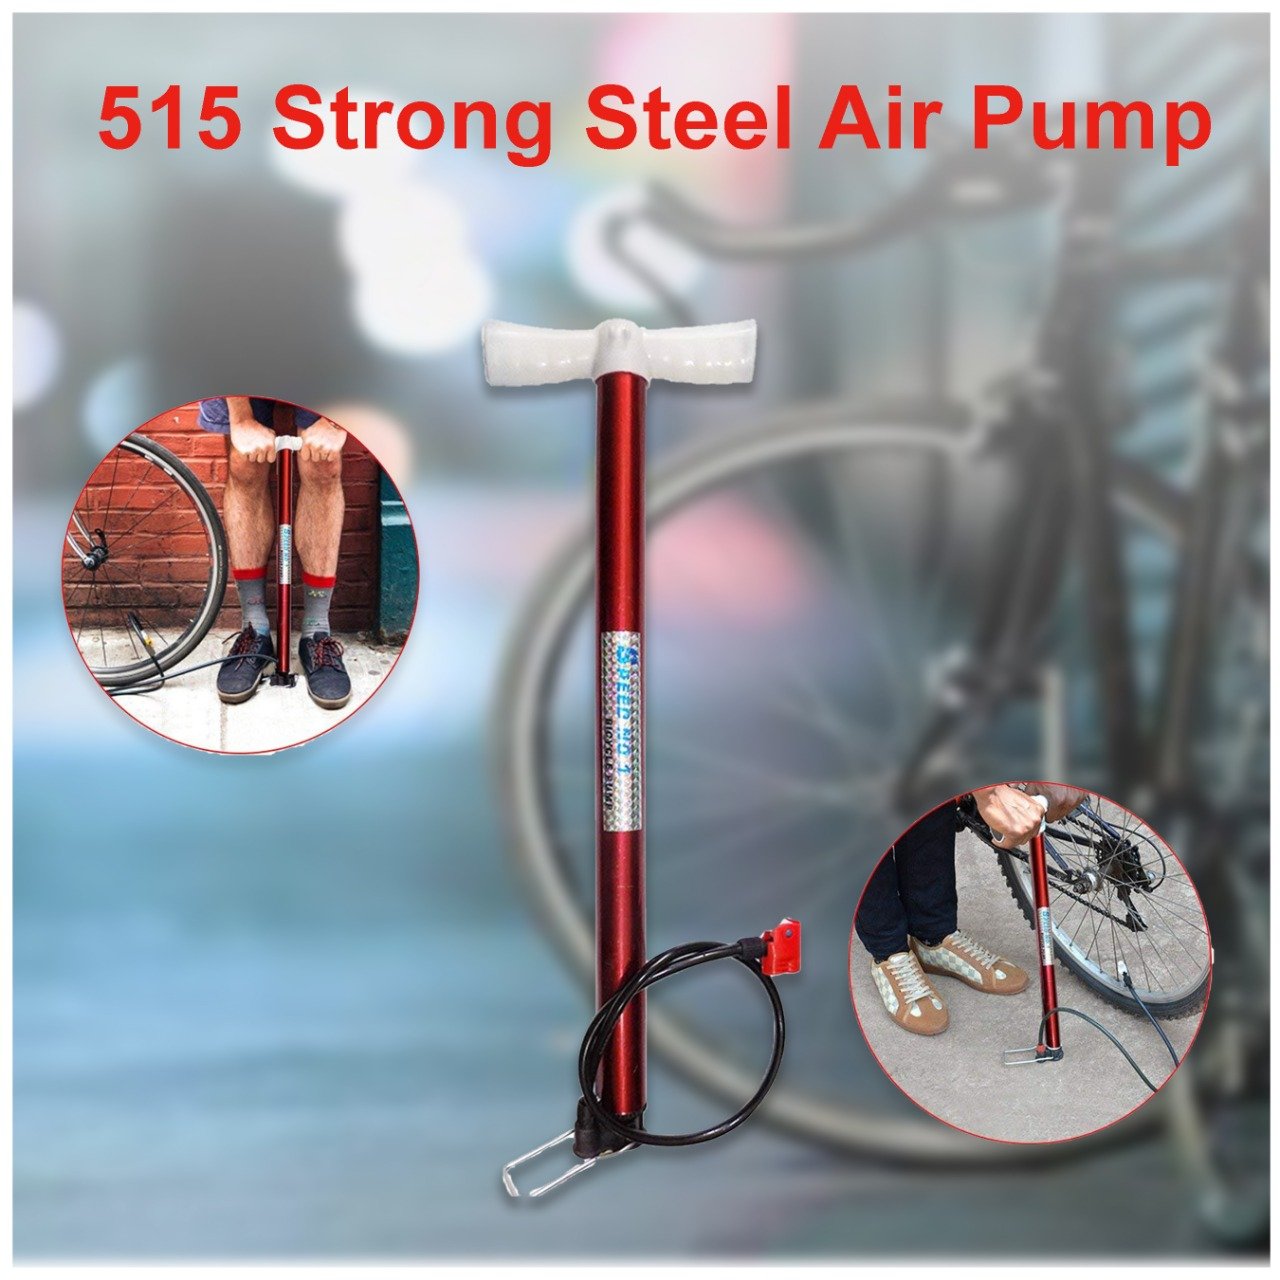 0515 Strong Steel Air Pump - SkyShopy